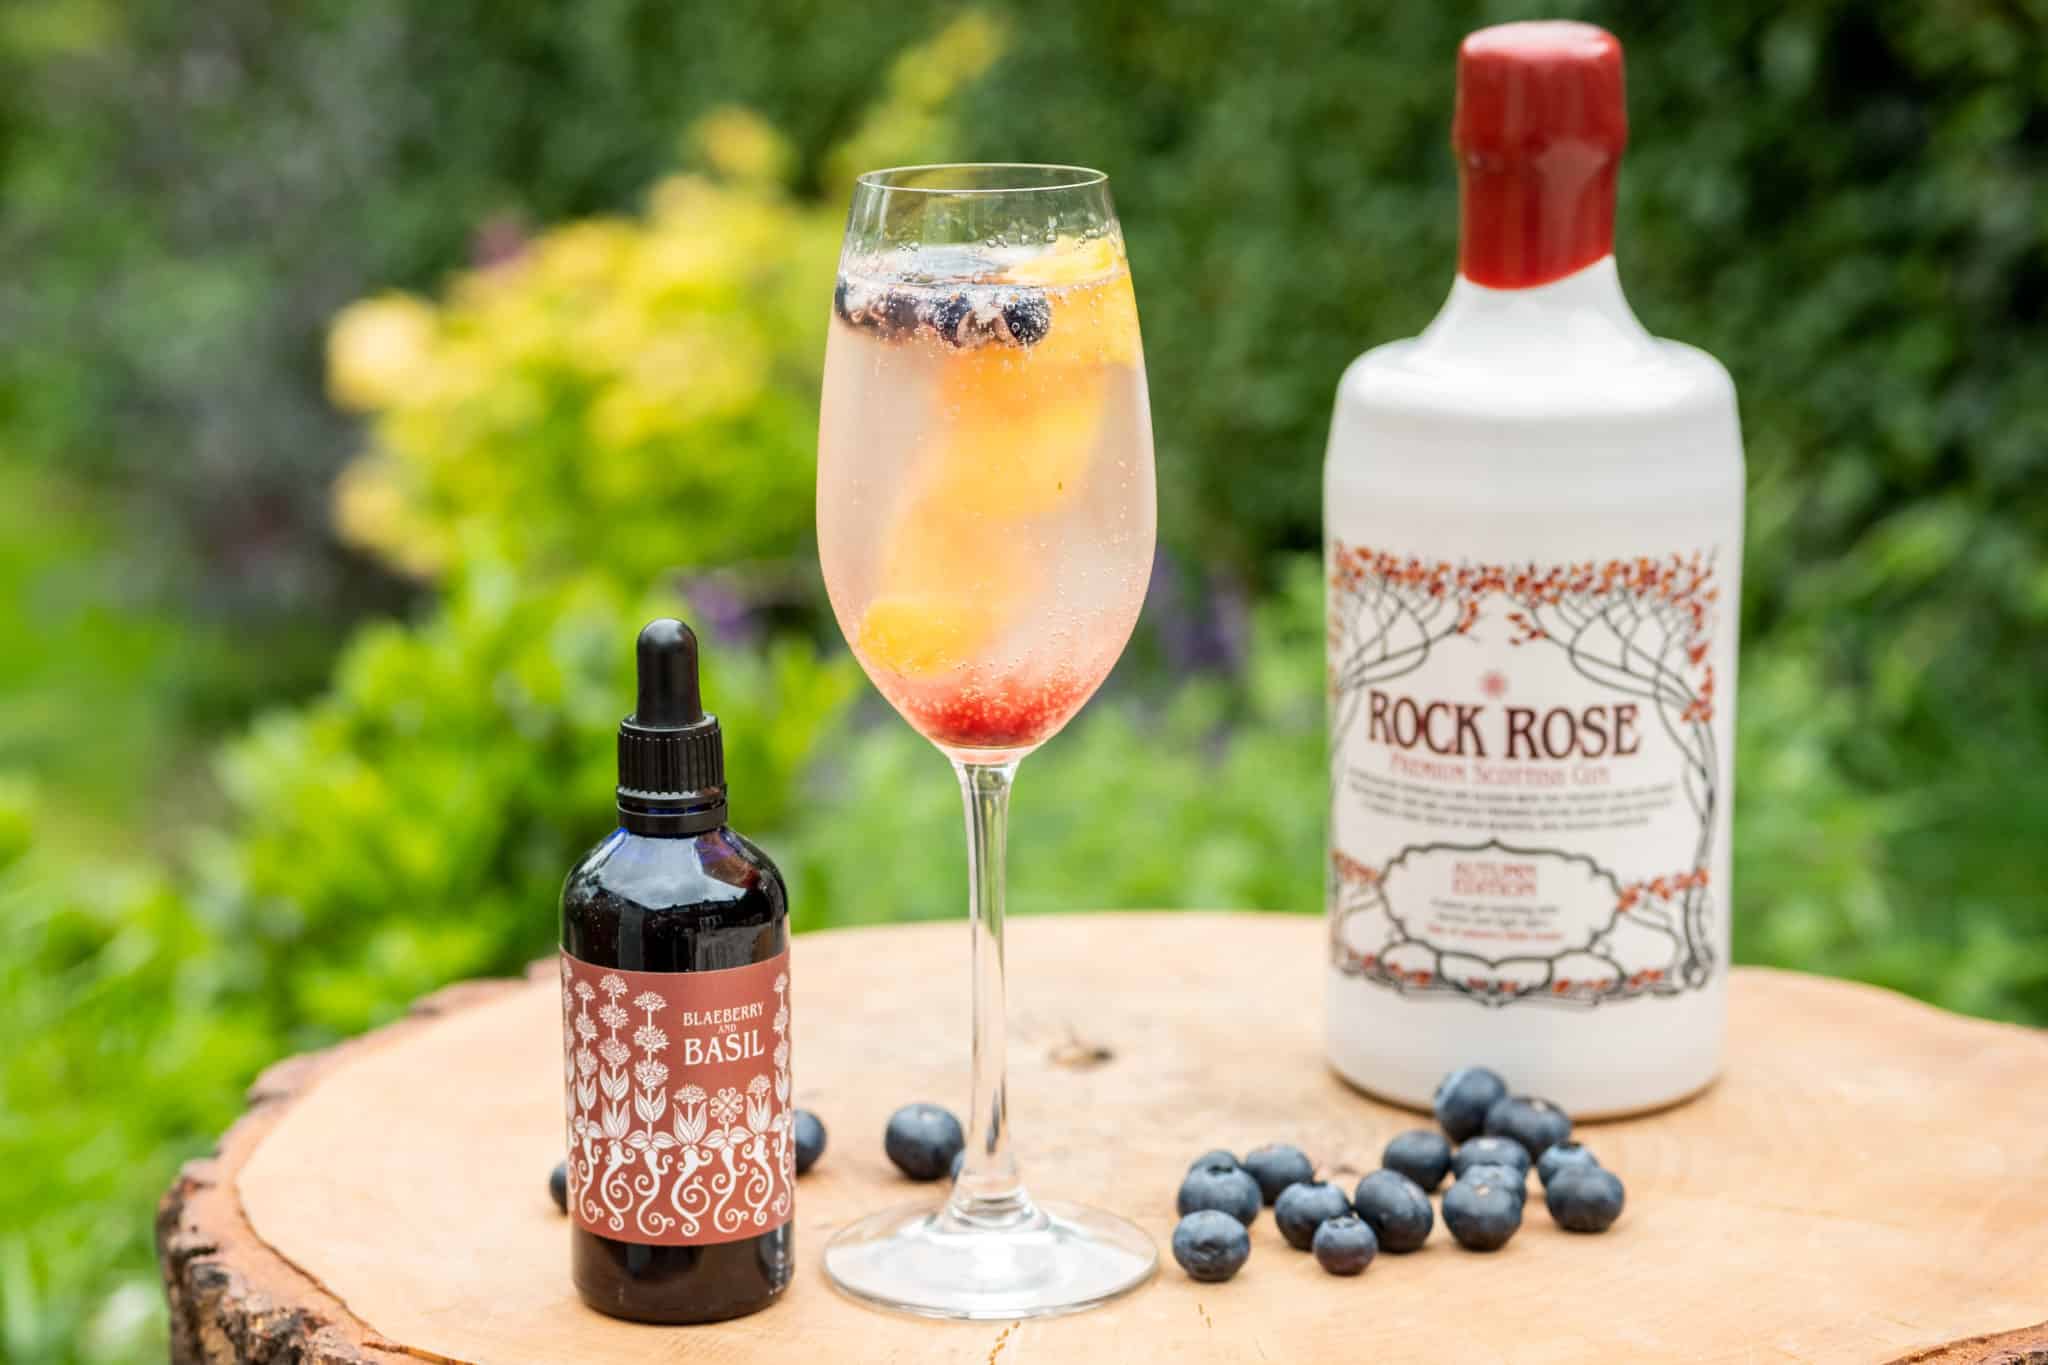 Bottle of Rock Rose Gin Autumn Edition and bottle of Blaeberry and Basil liquid garnish with Highland 75 cocktail served in a flute glass and garnished with blueberries